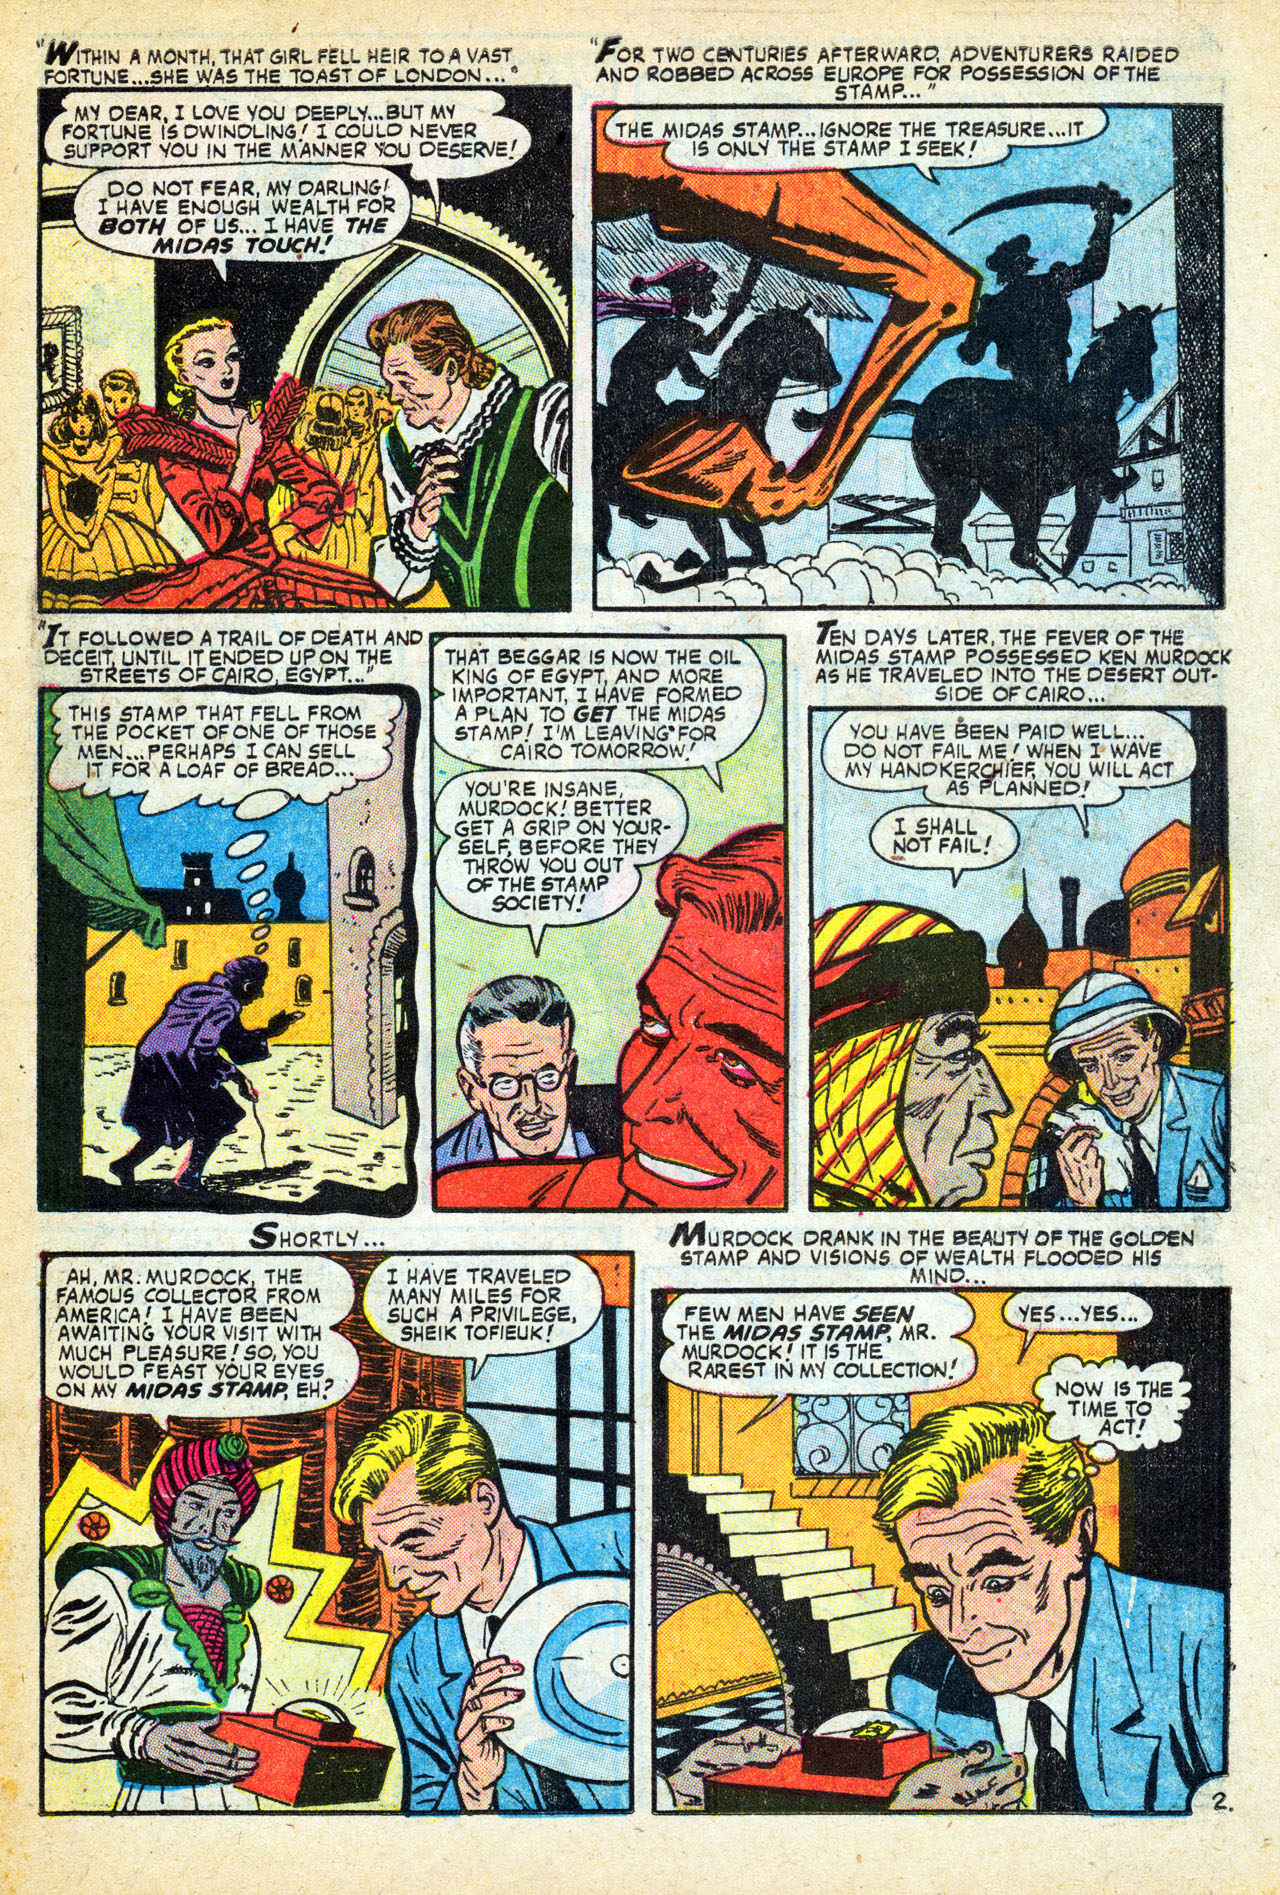 Marvel Tales (1949) 151 Page 18